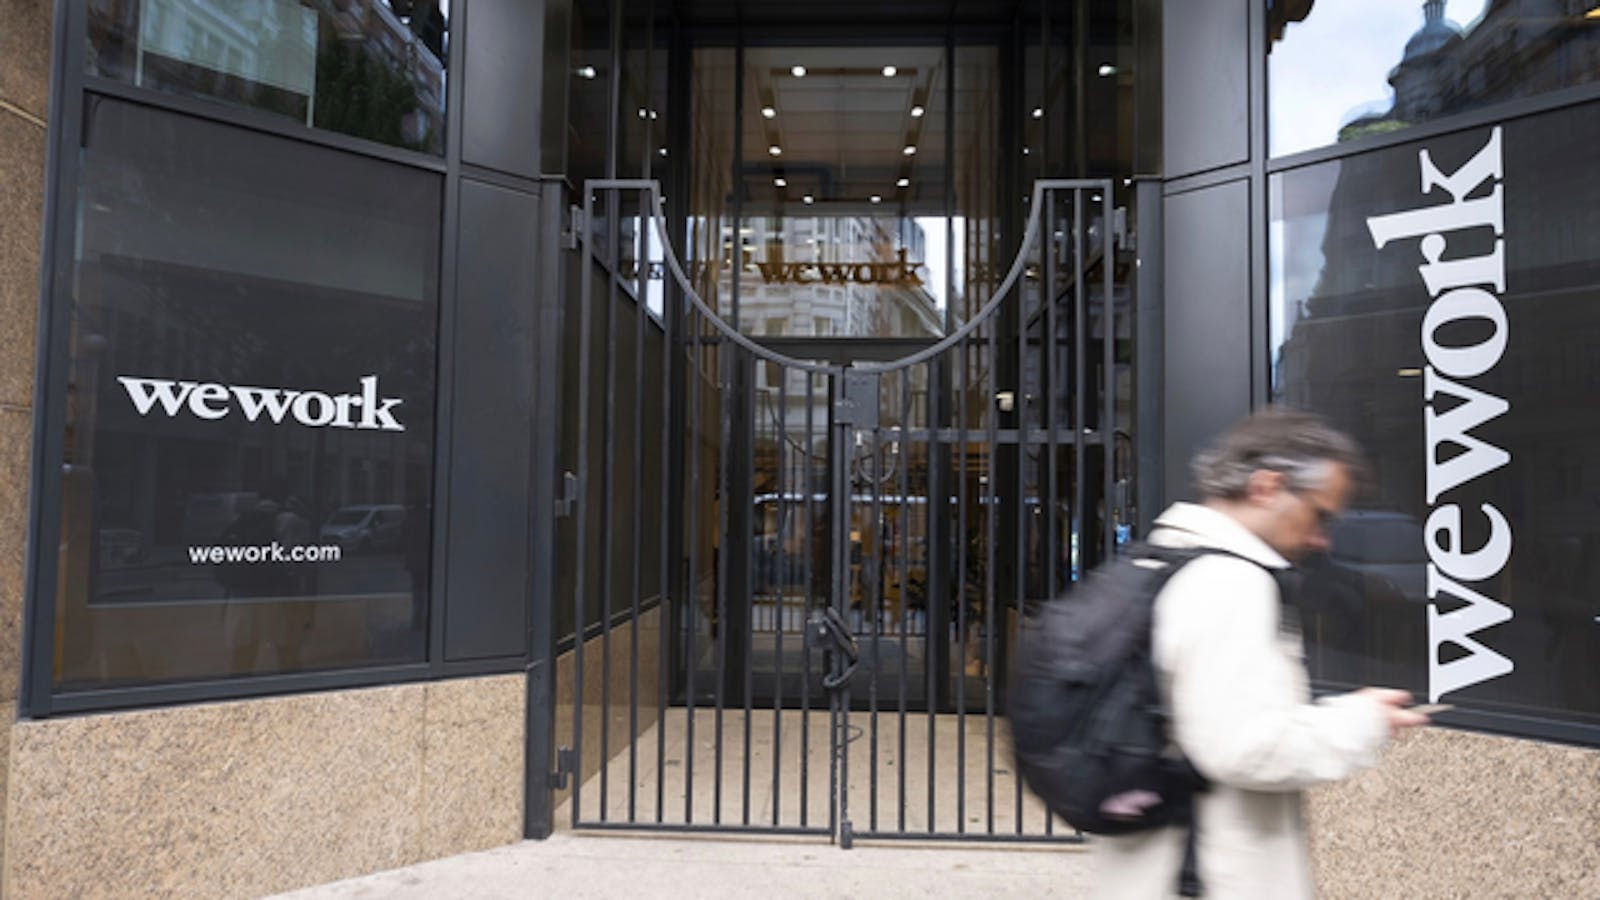 A WeWork location in London. Photo: Bloomberg